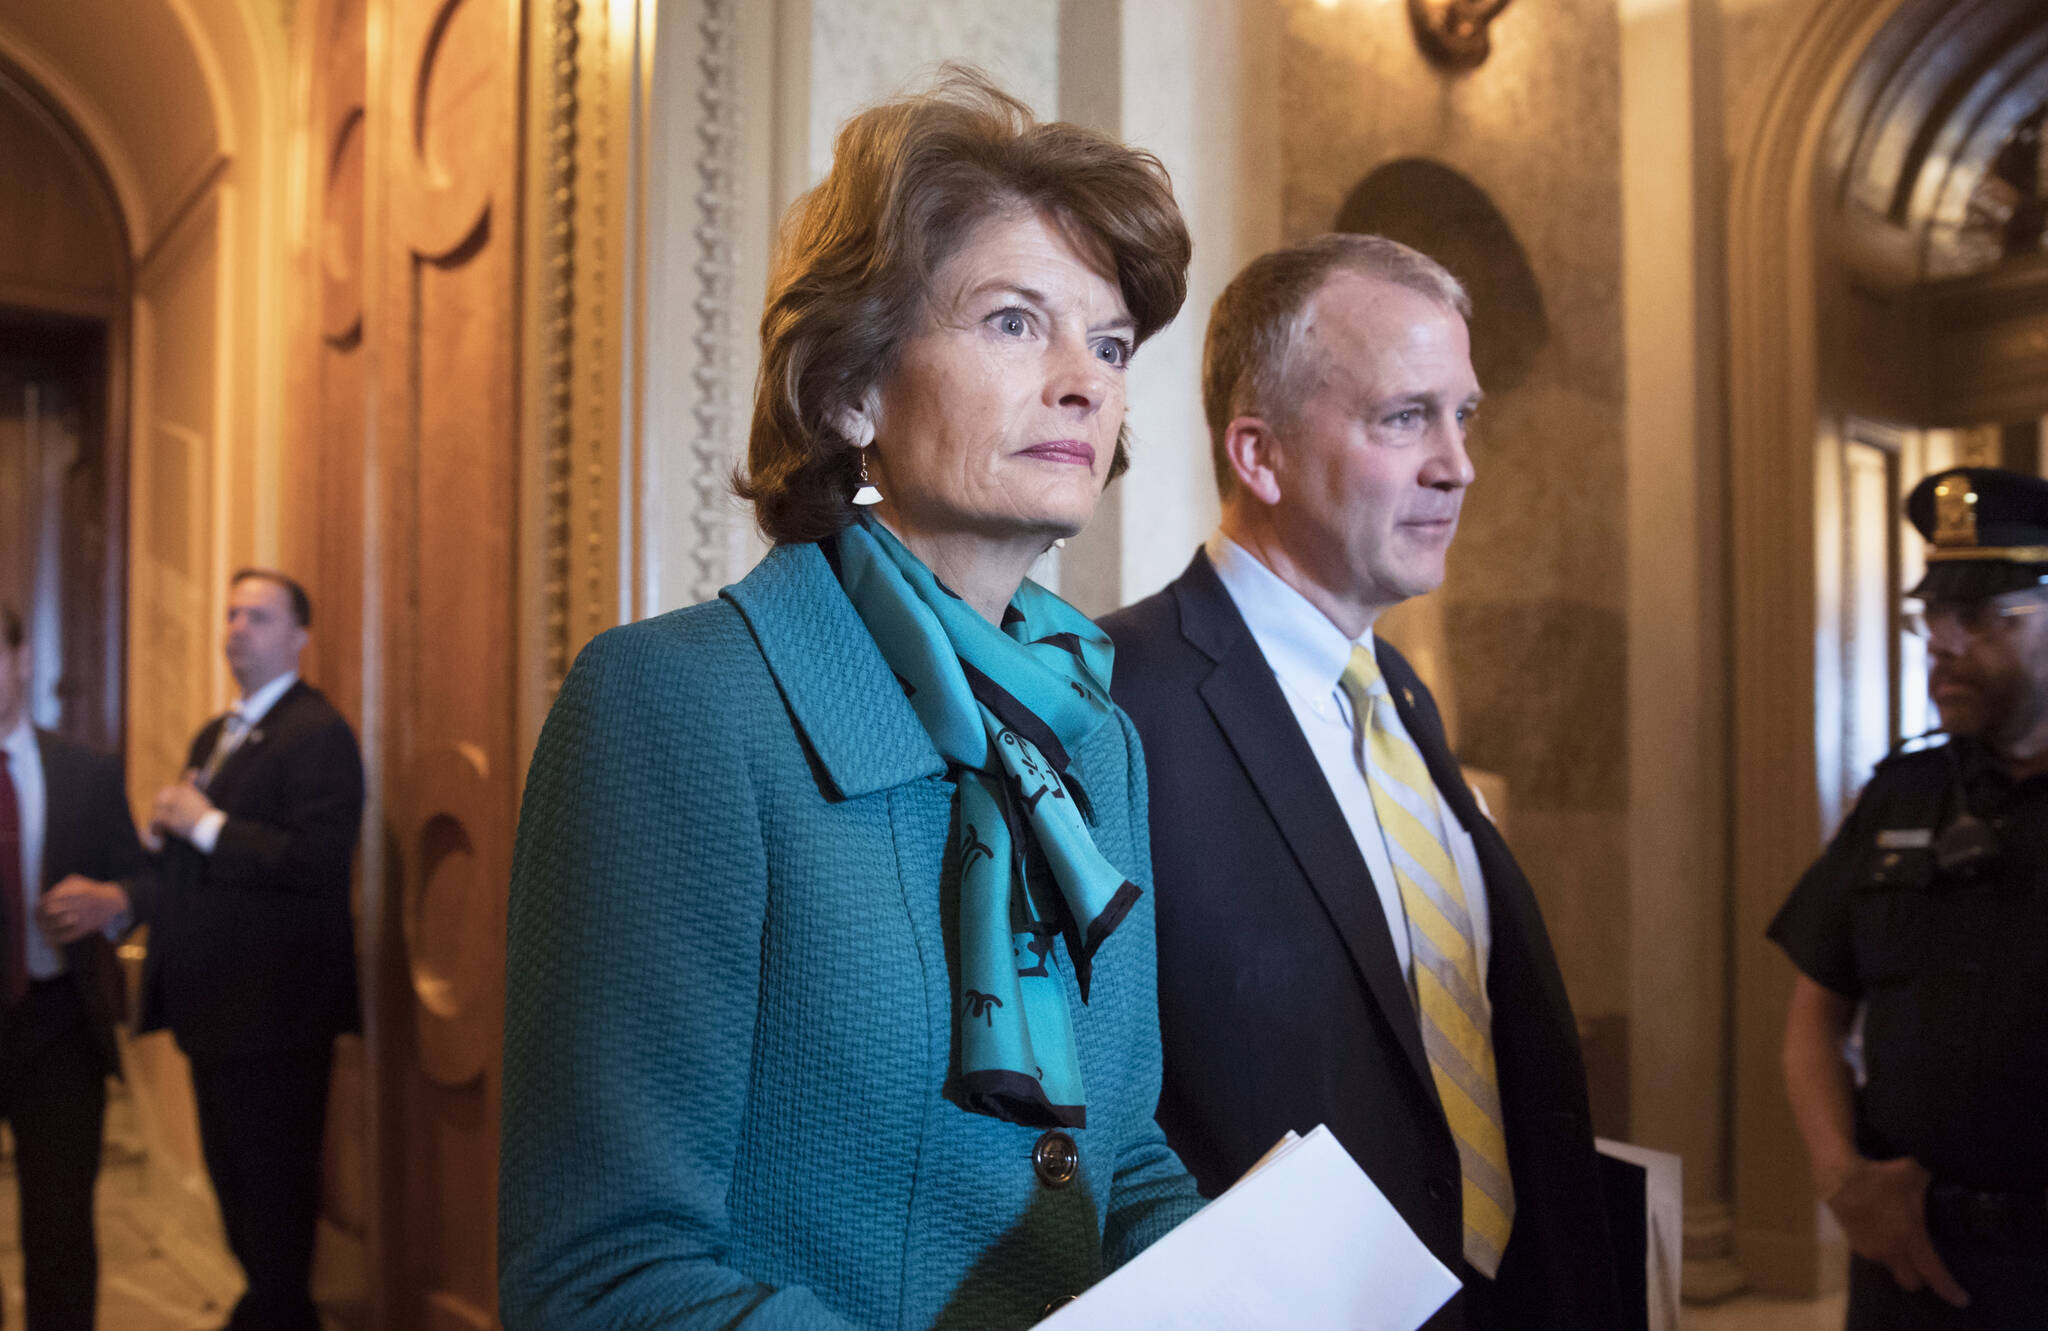 AP Photo / J. Scott Applewhite
Sen. Lisa Murkowski, R-Alaska, and Sen. Dan Sullivan, R-Alaska, leave the chamber after a vote on Capitol Hill in Washington, early Wednesday, May 10, 2017. Jay Allen Johnson, 65, who faced charges of sending a series of profanity-laced voice messages to the two senators, entered guilty pleas, Monday, Jan. 3, 2022, in federal court in Fairbanks, Alaska, to two counts of threatening to kill a U.S. official. U.S. District Judge Ralph Beistline accepted Johnson’s pleas and set sentencing for April 8.